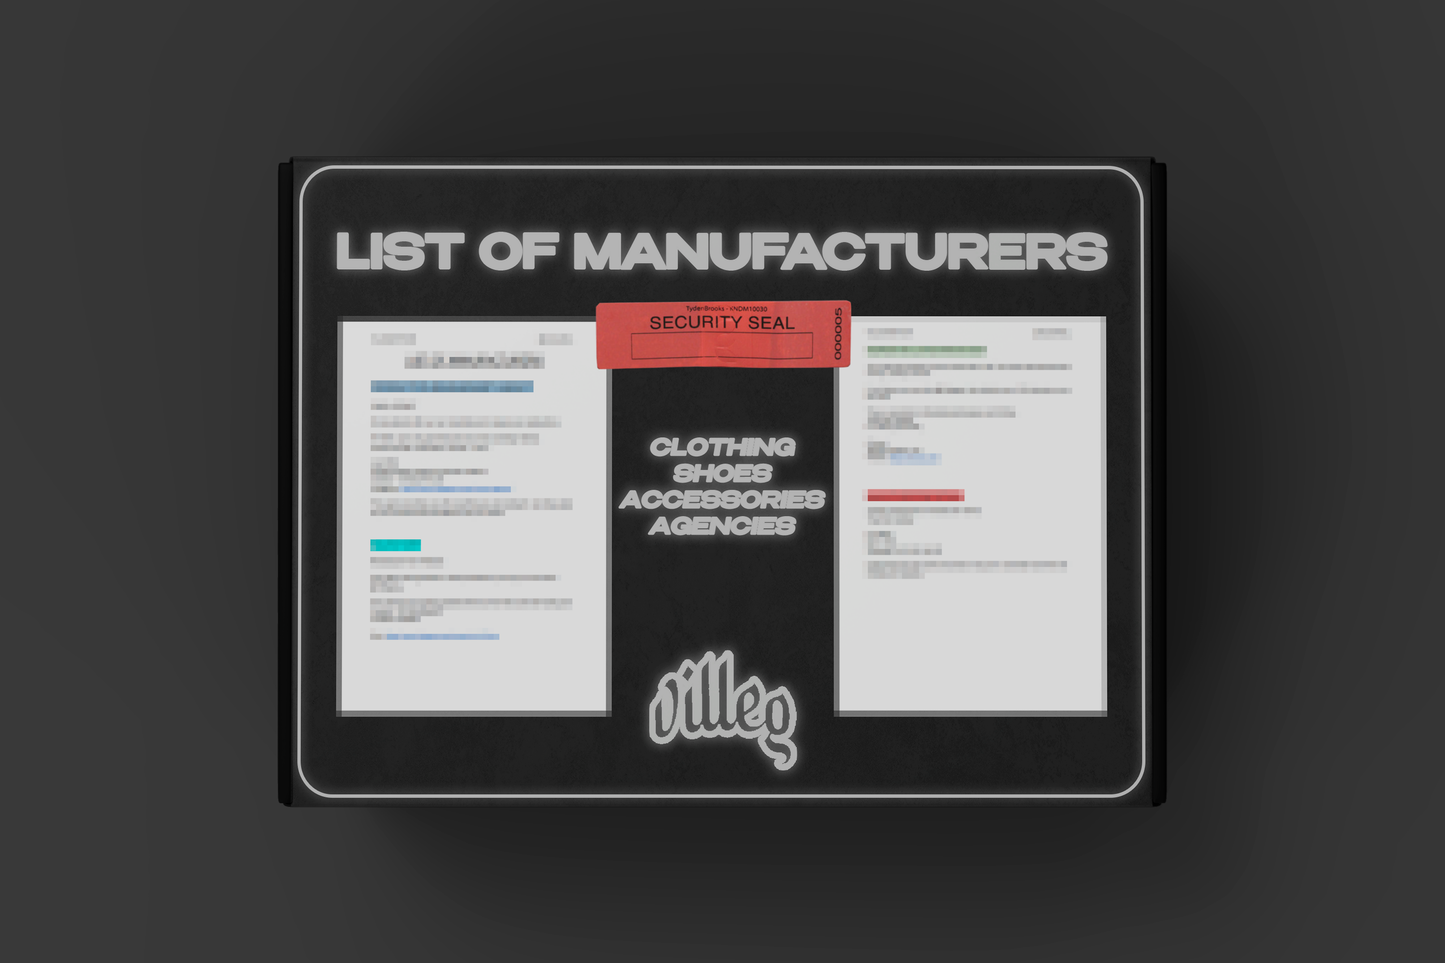 LIST OF MANUFACTURERS